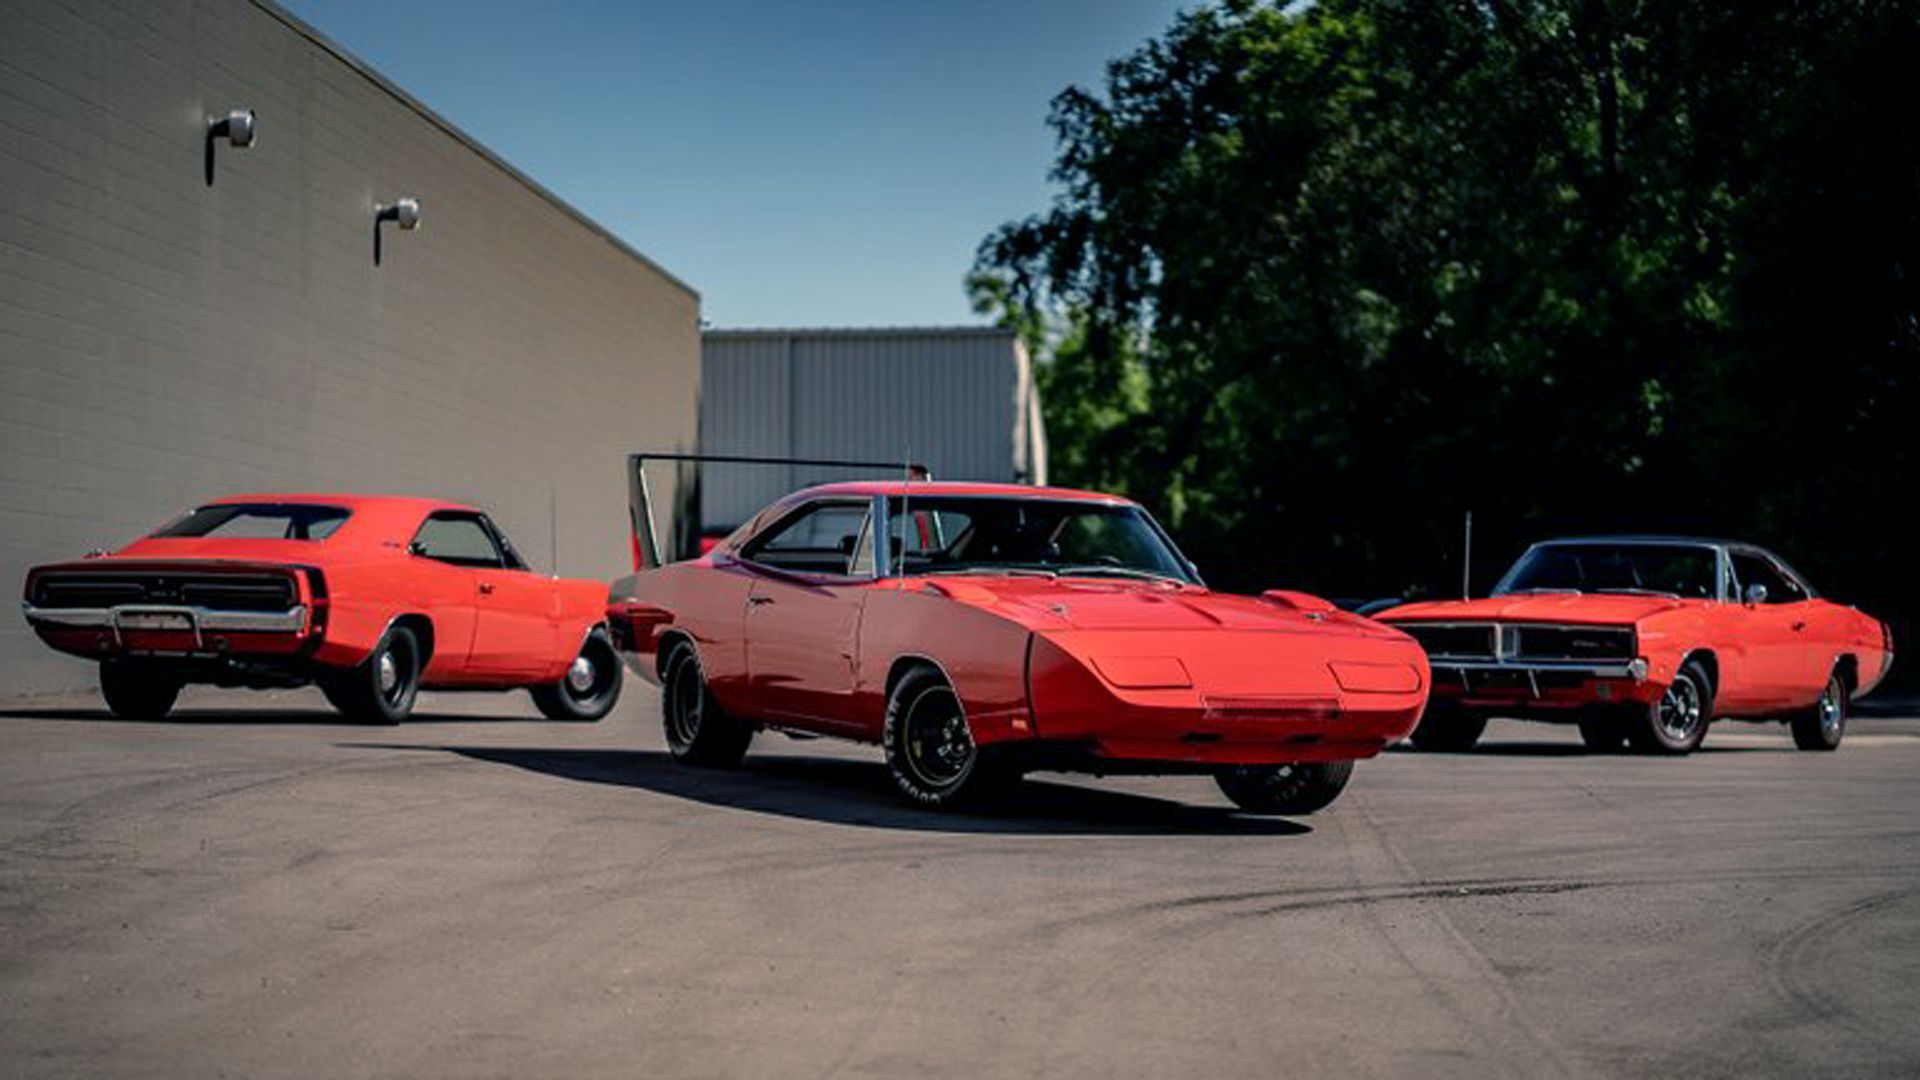 Which Red, Rare, Restored 1969 Dodge Charger Would You Buy?